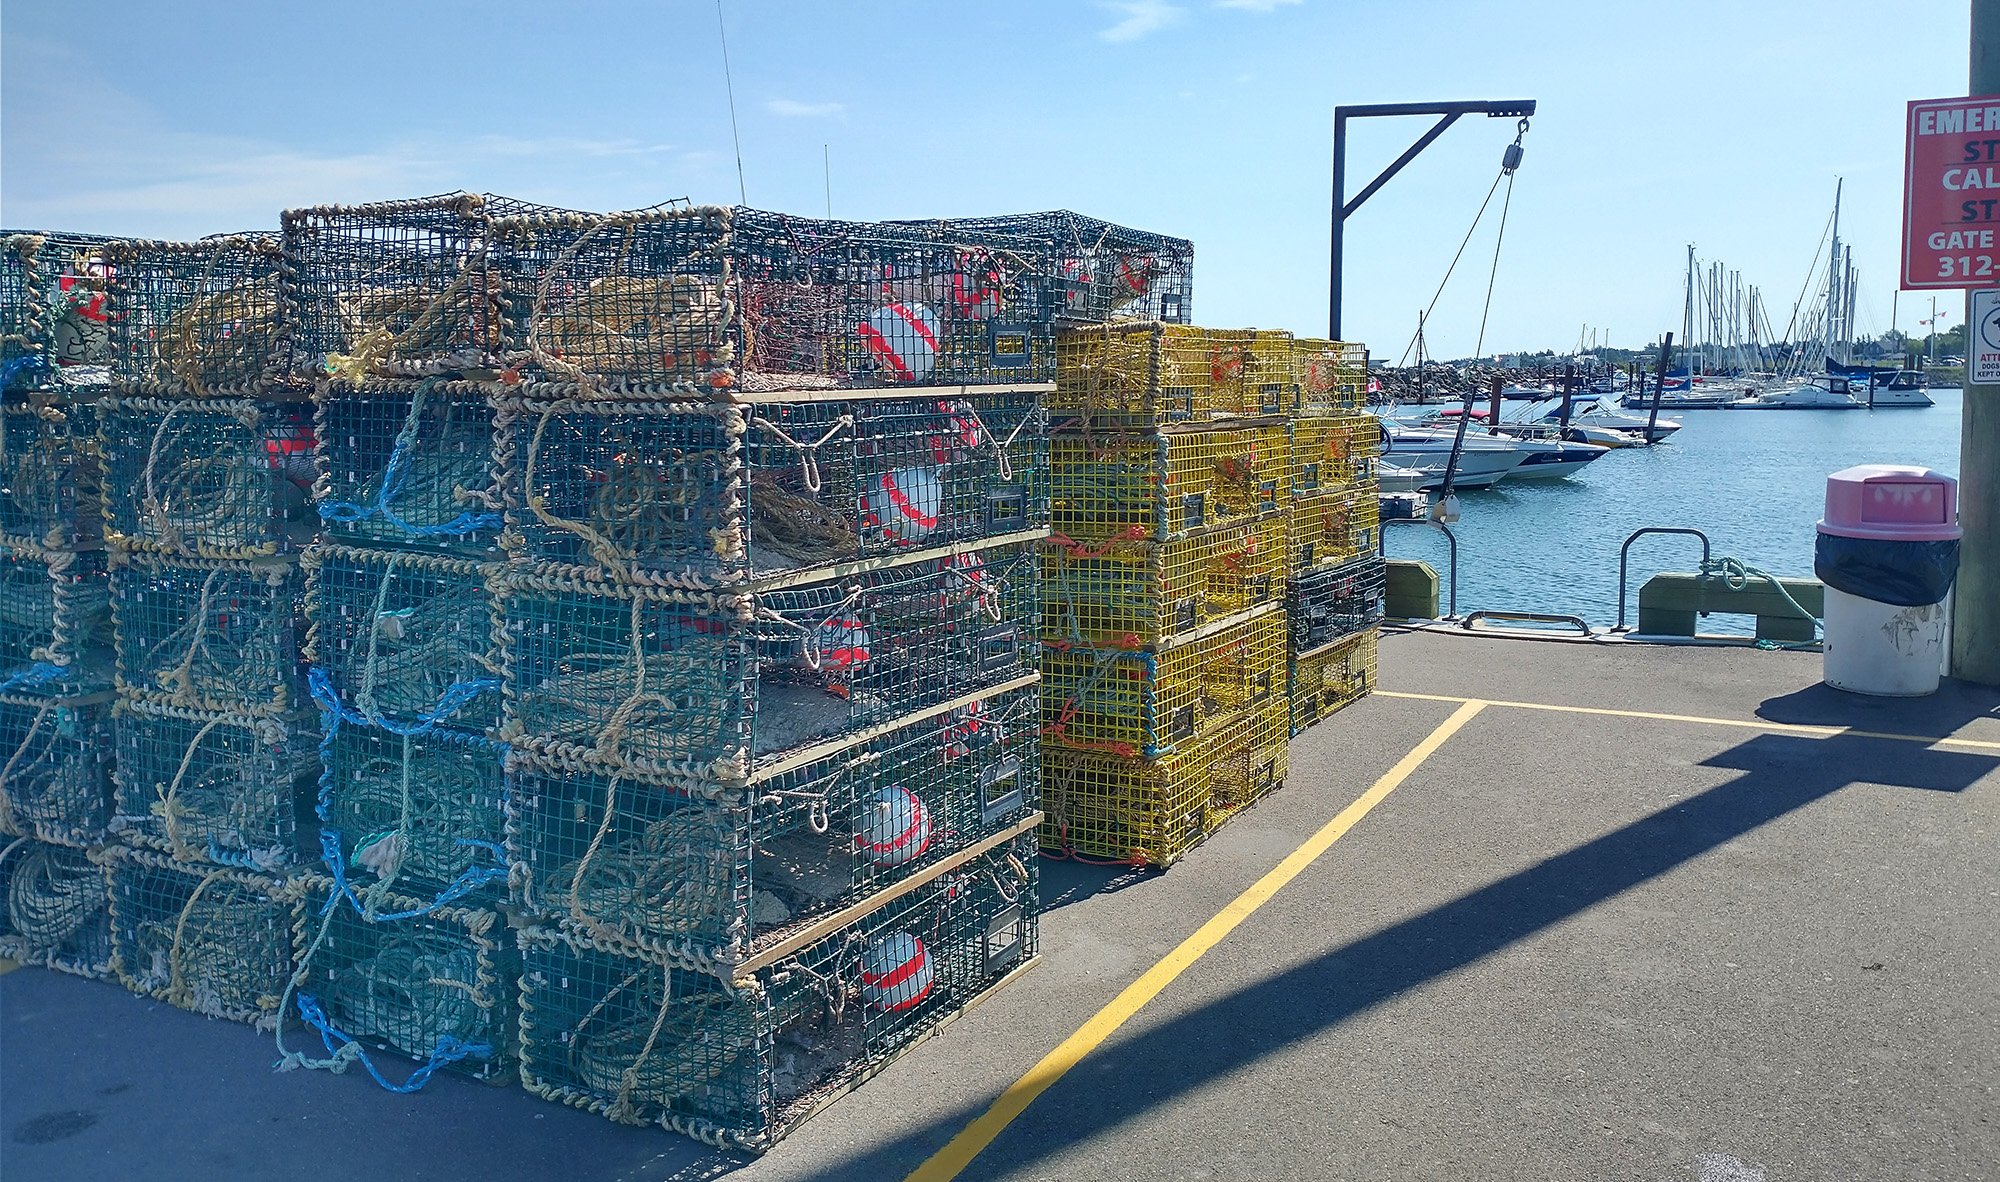 Bunch of lobster traps, sadly empty. 